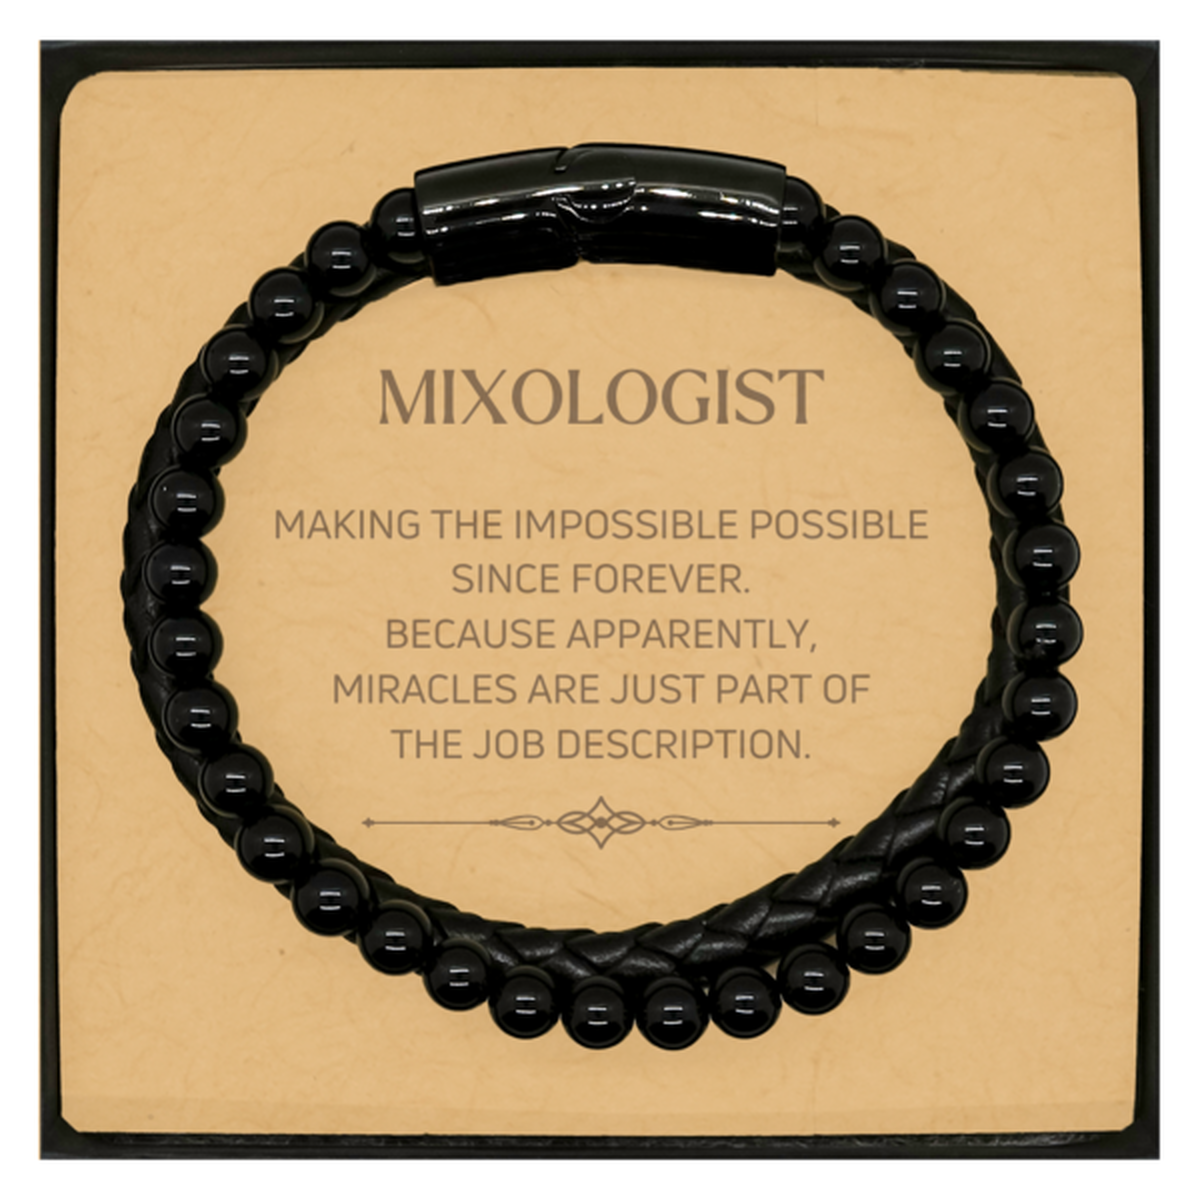 Funny Mixologist Gifts, Miracles are just part of the job description, Inspirational Birthday Christmas Stone Leather Bracelets For Mixologist, Men, Women, Coworkers, Friends, Boss